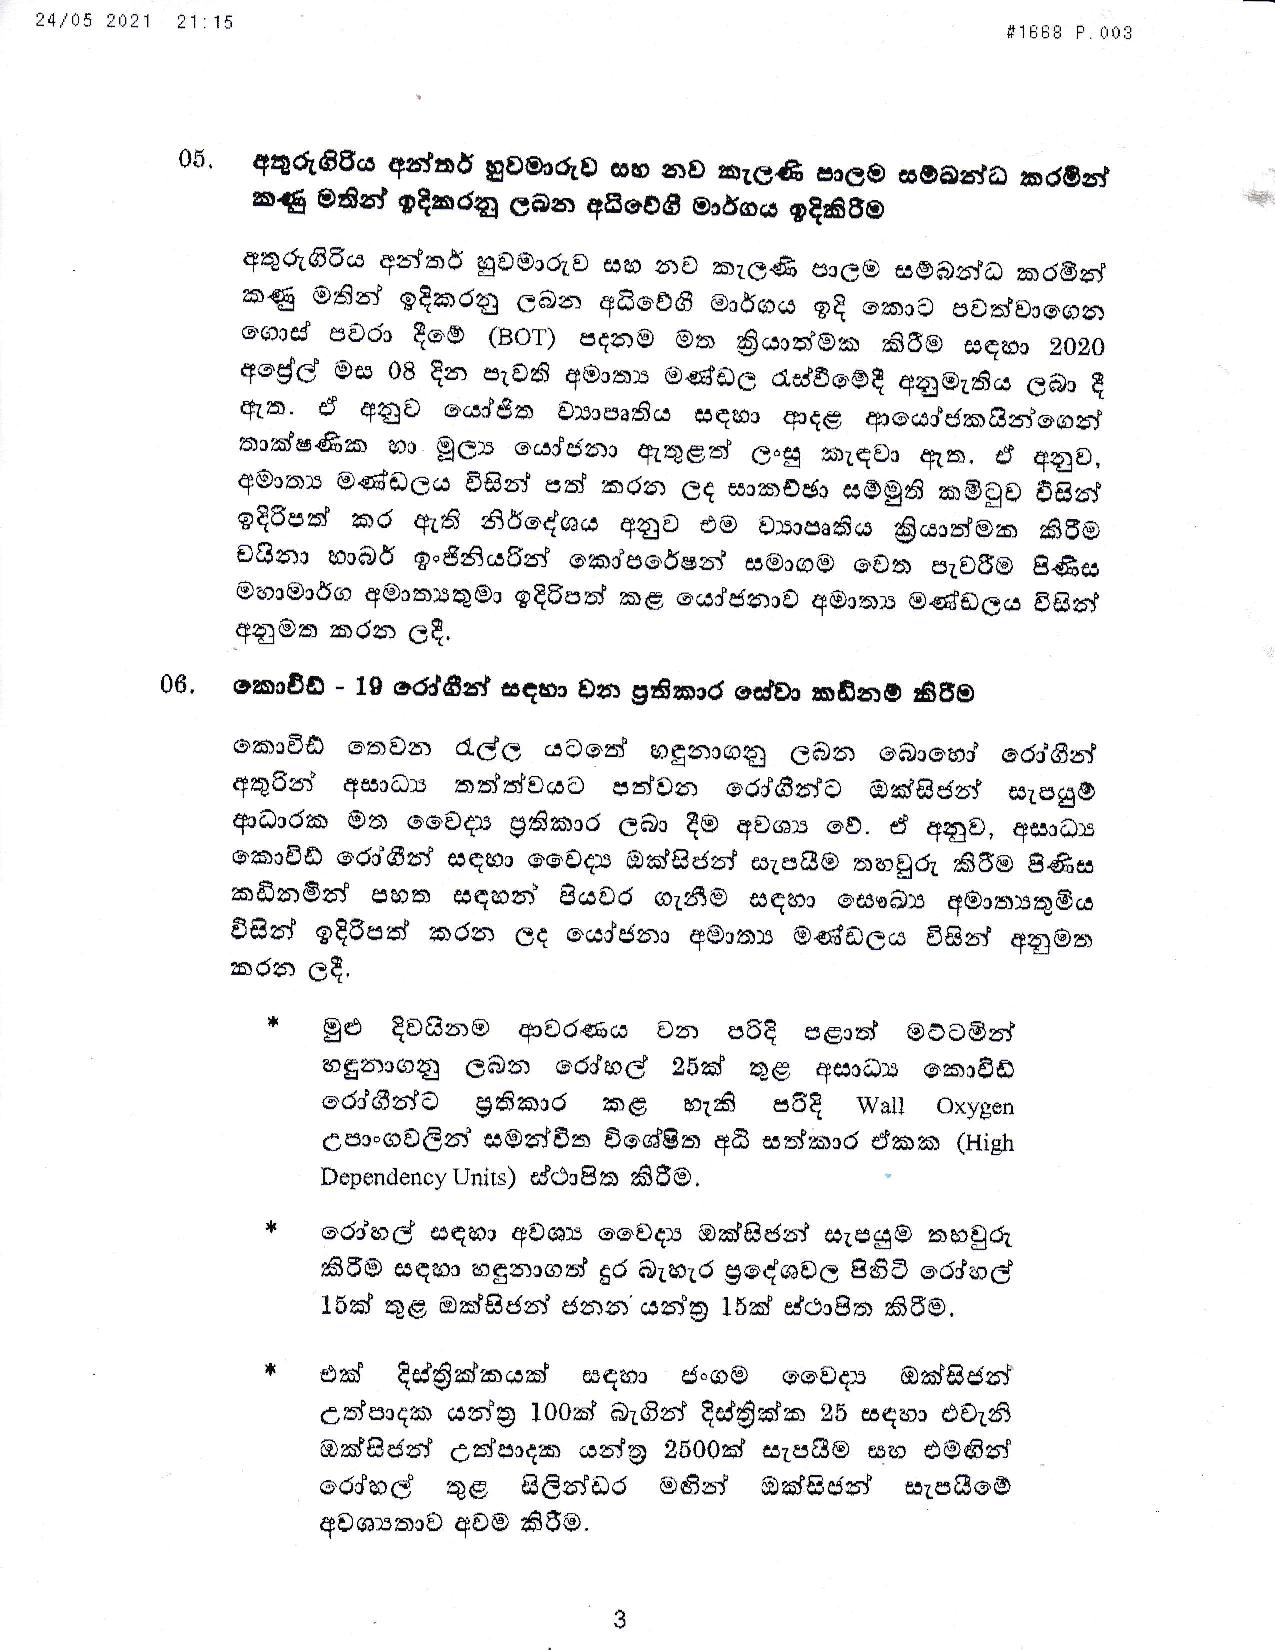 Cabinet Decisions on 24.05.2021 2 page 003